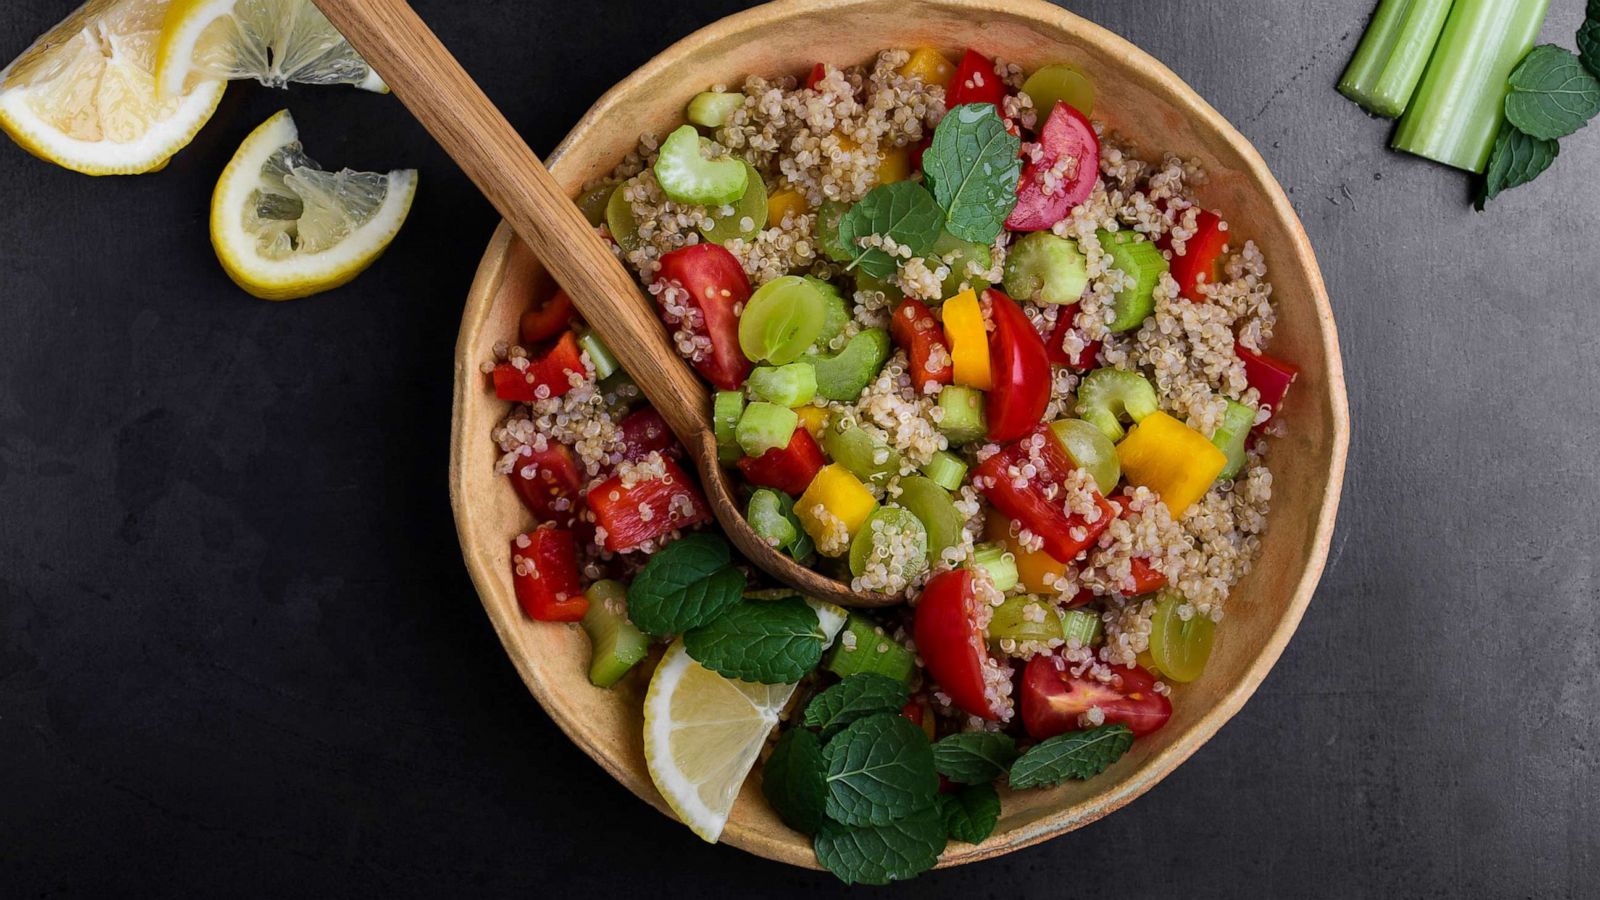 PHOTO: Quinoa salad with red and yellow bell peppers, tomatoes, celery and grapes.